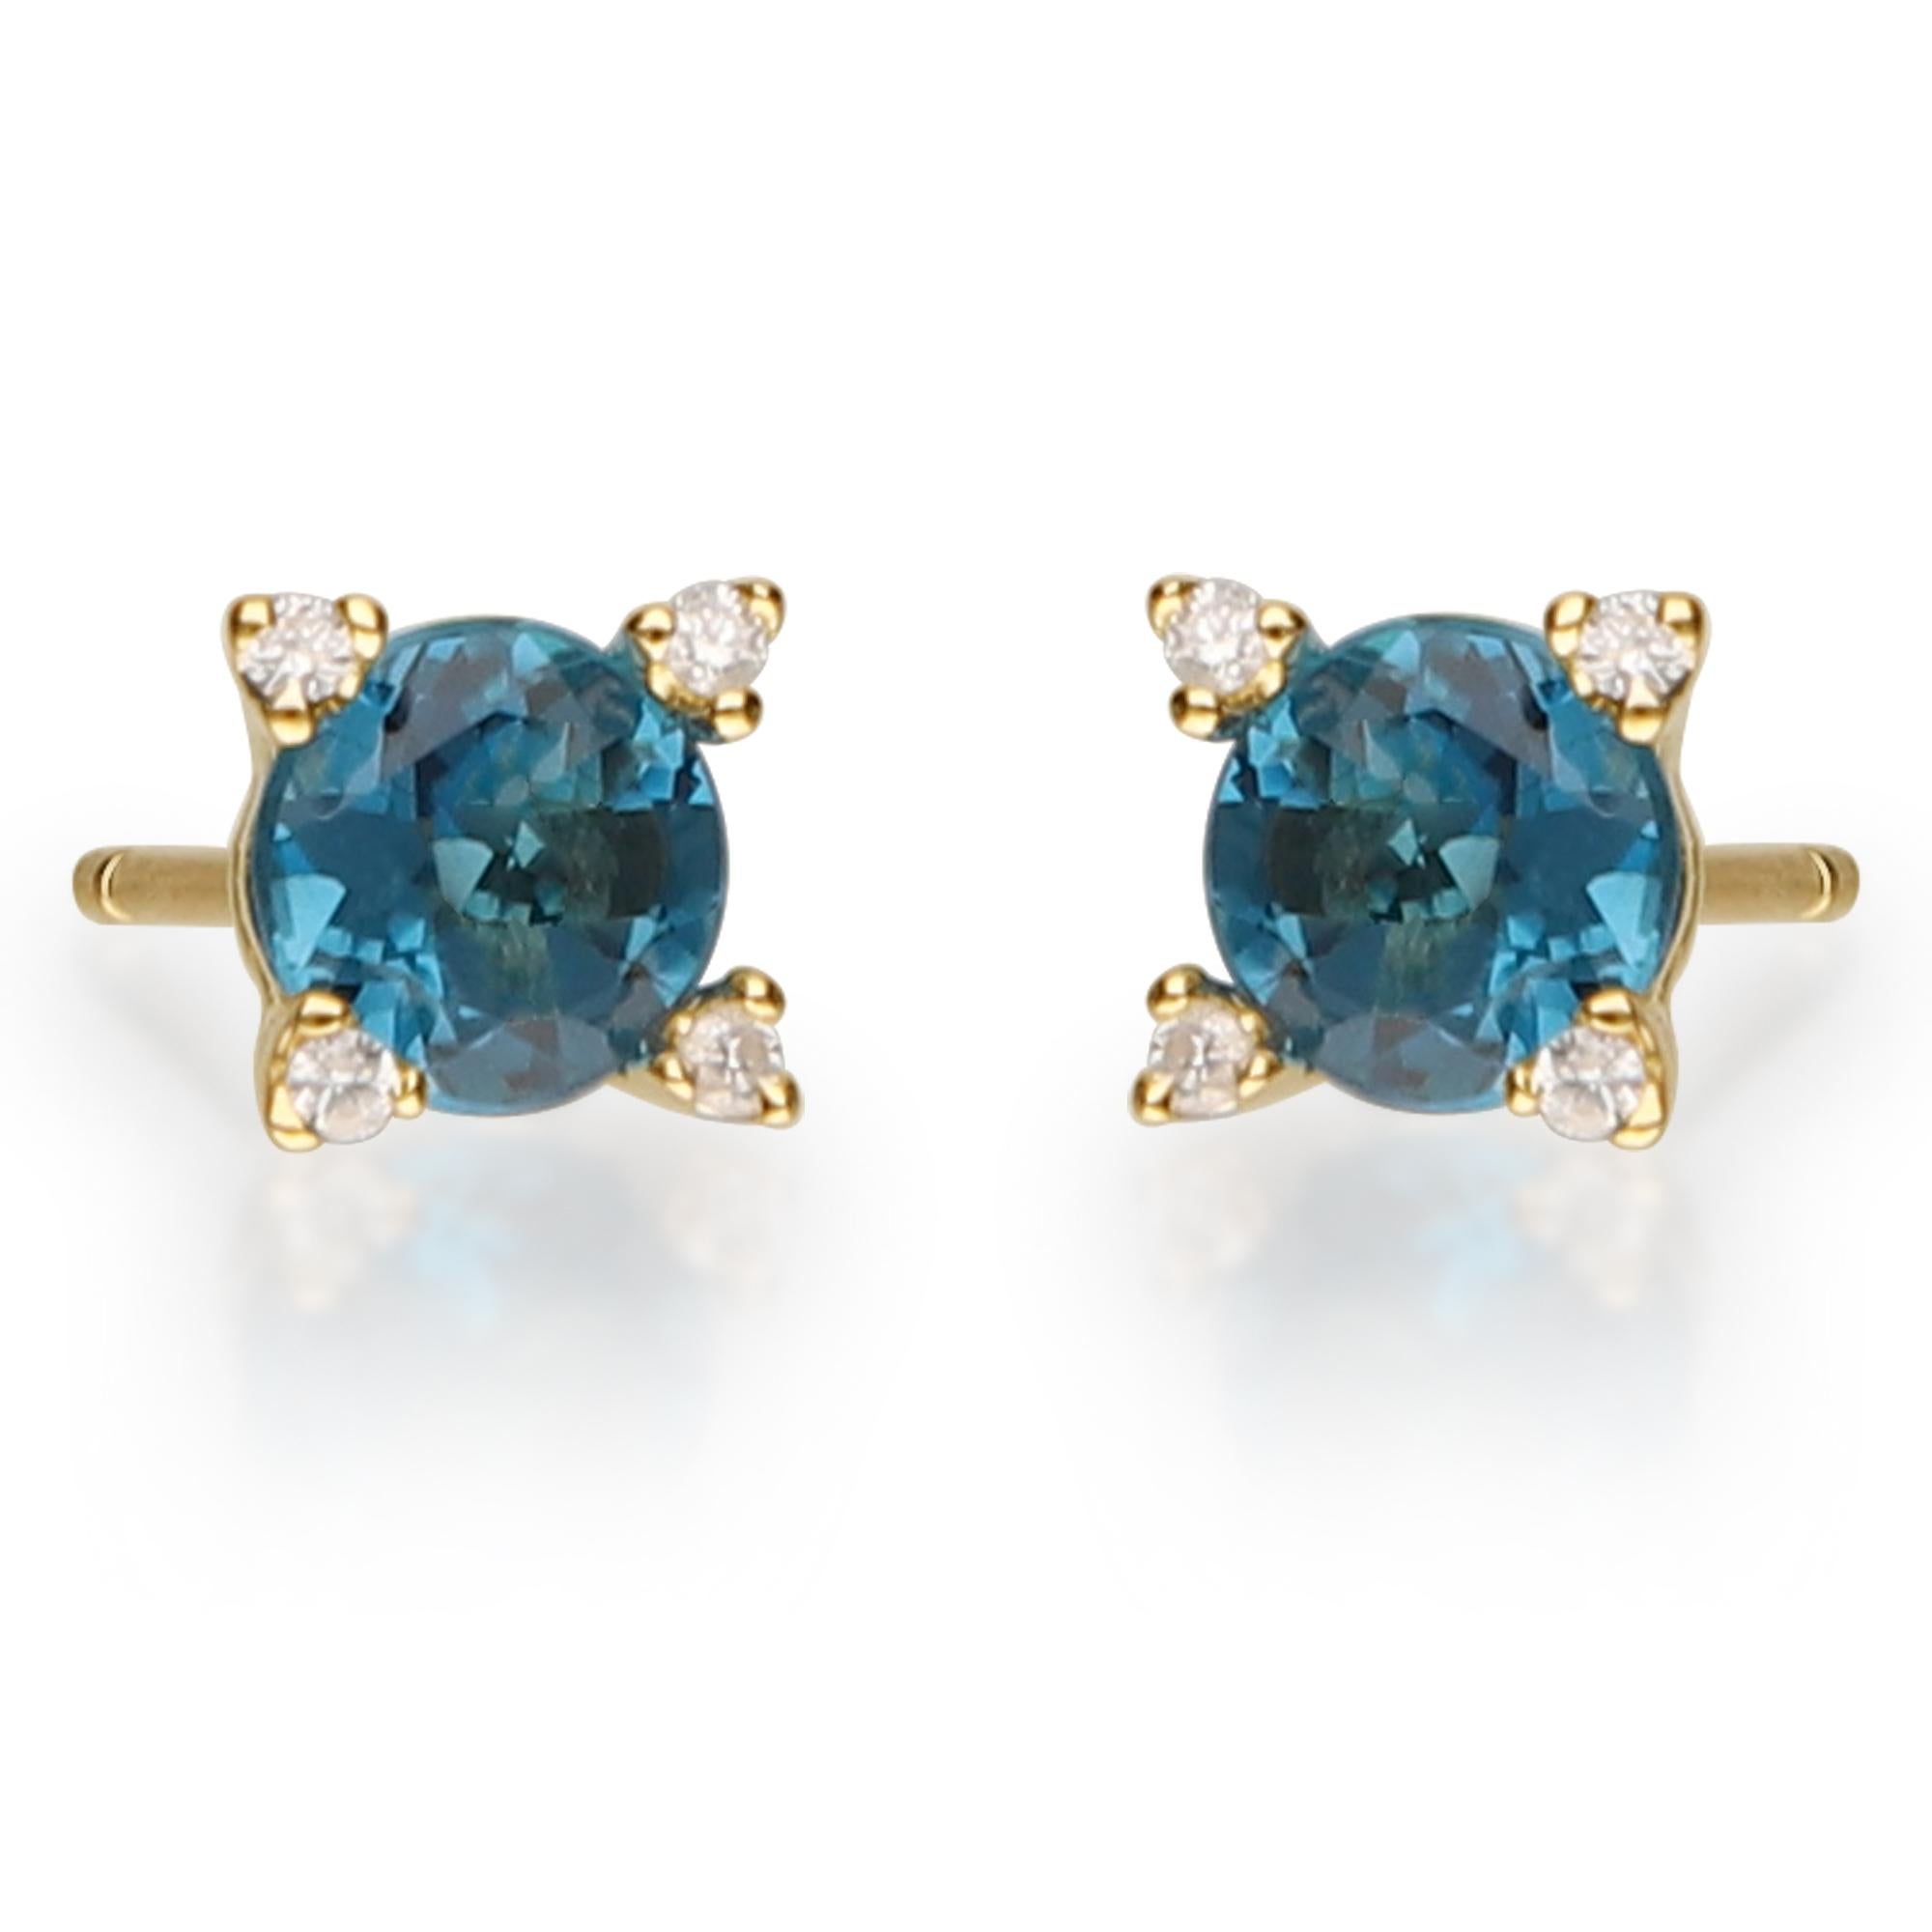 Decorate yourself in elegance with this Earring is crafted from 14-karat Yellow Gold by Gin & Grace Earring. This Earring is made up of Round-cut (2 pcs) 1.14 carat London Blue Topaz and Round-cut White Diamond (8 pcs) 0.05 carat. This Stud Earring